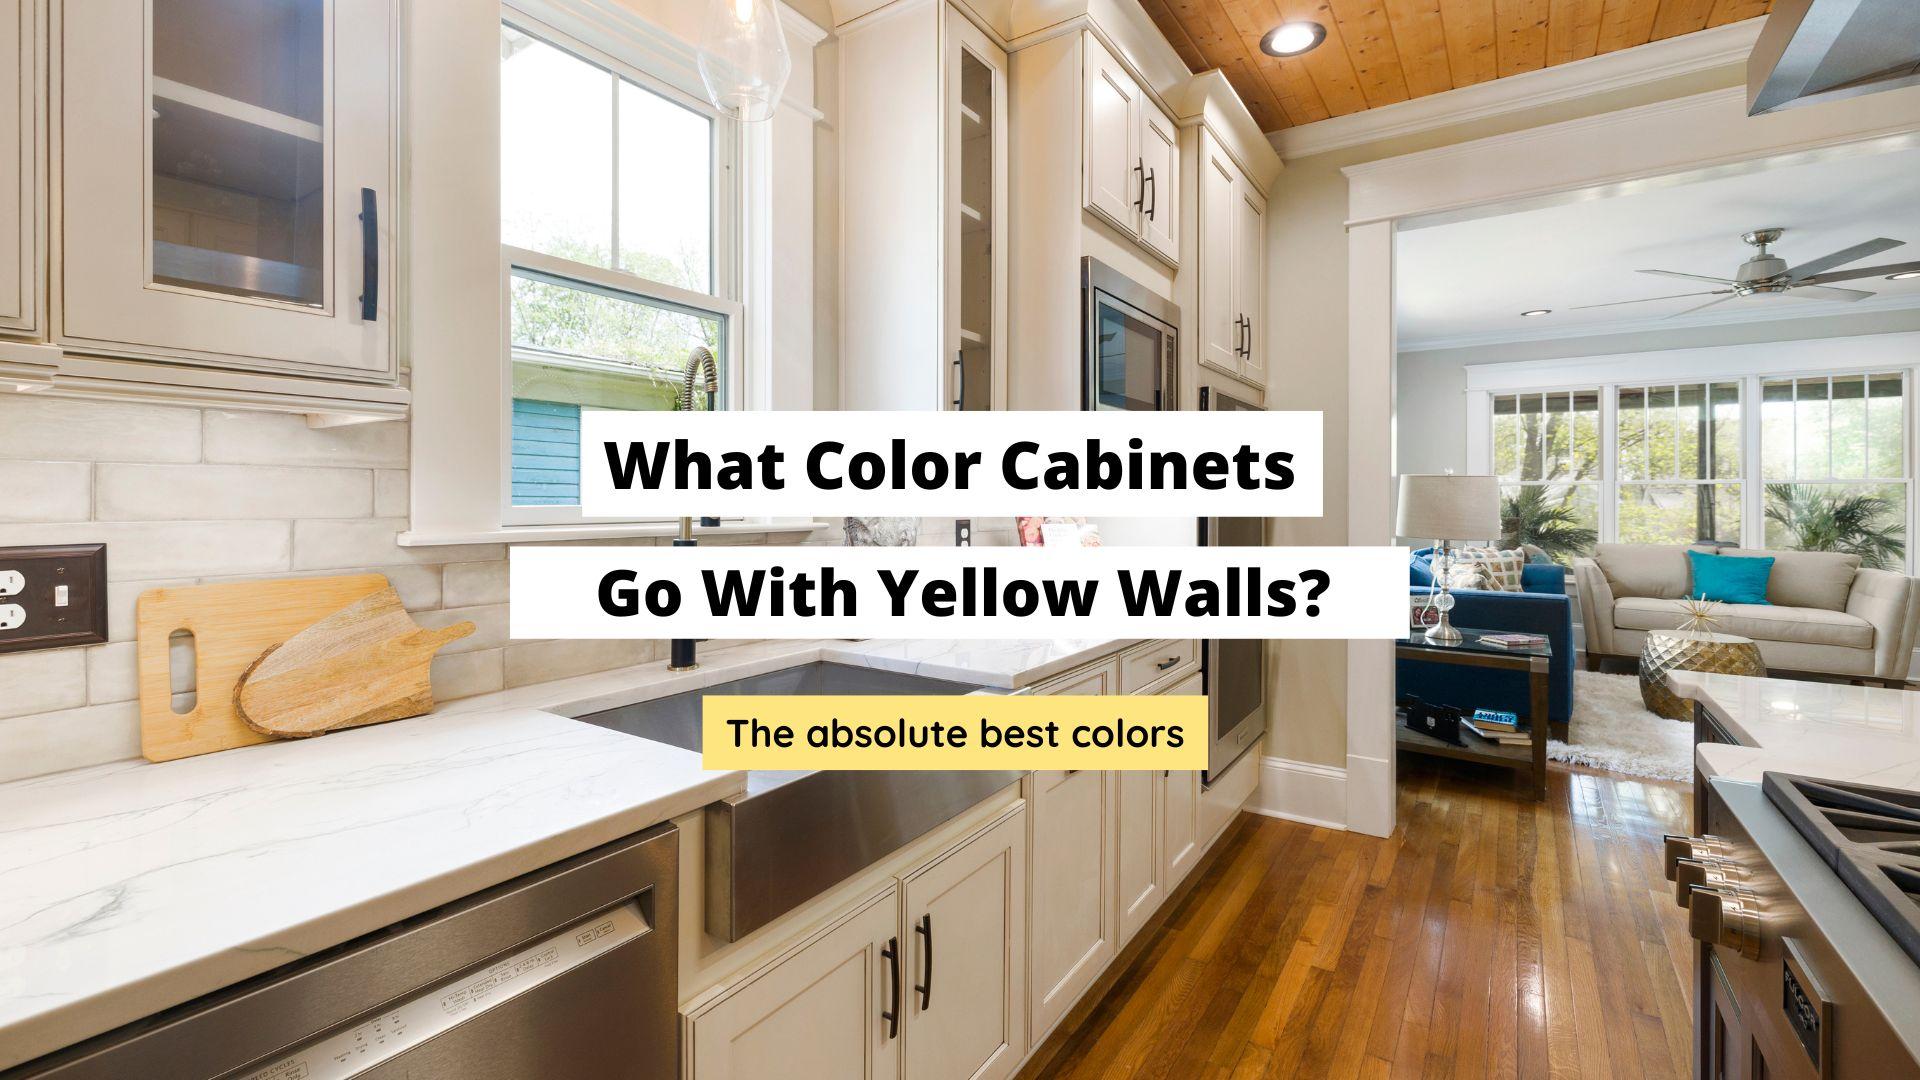 what color cabinets go with yellow walls?